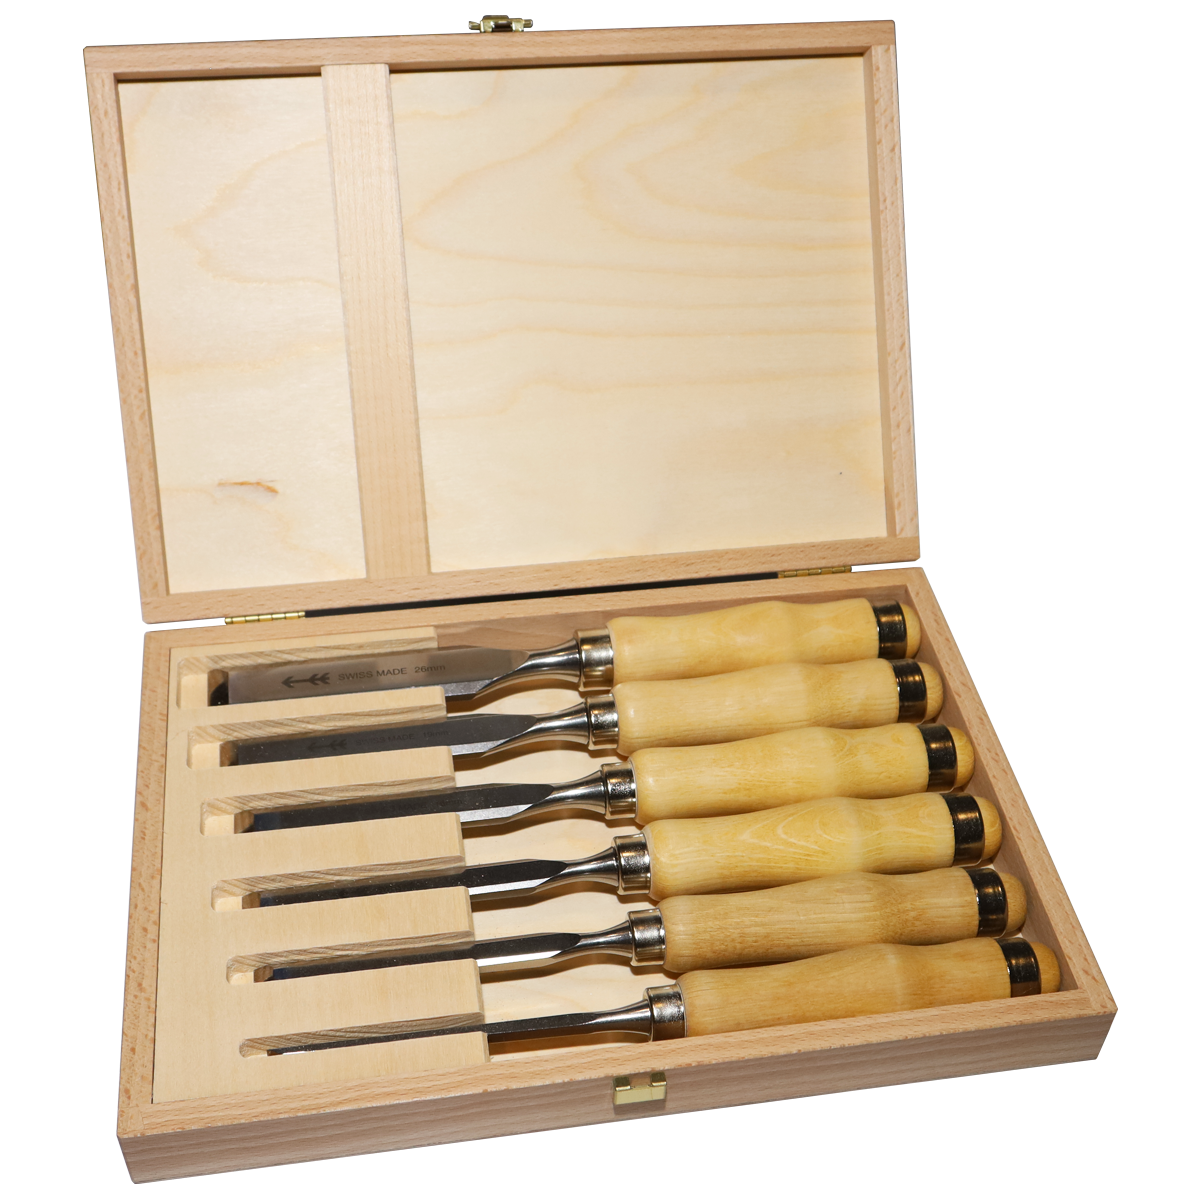 Bench Chisels, Set of 6 by Pfeil